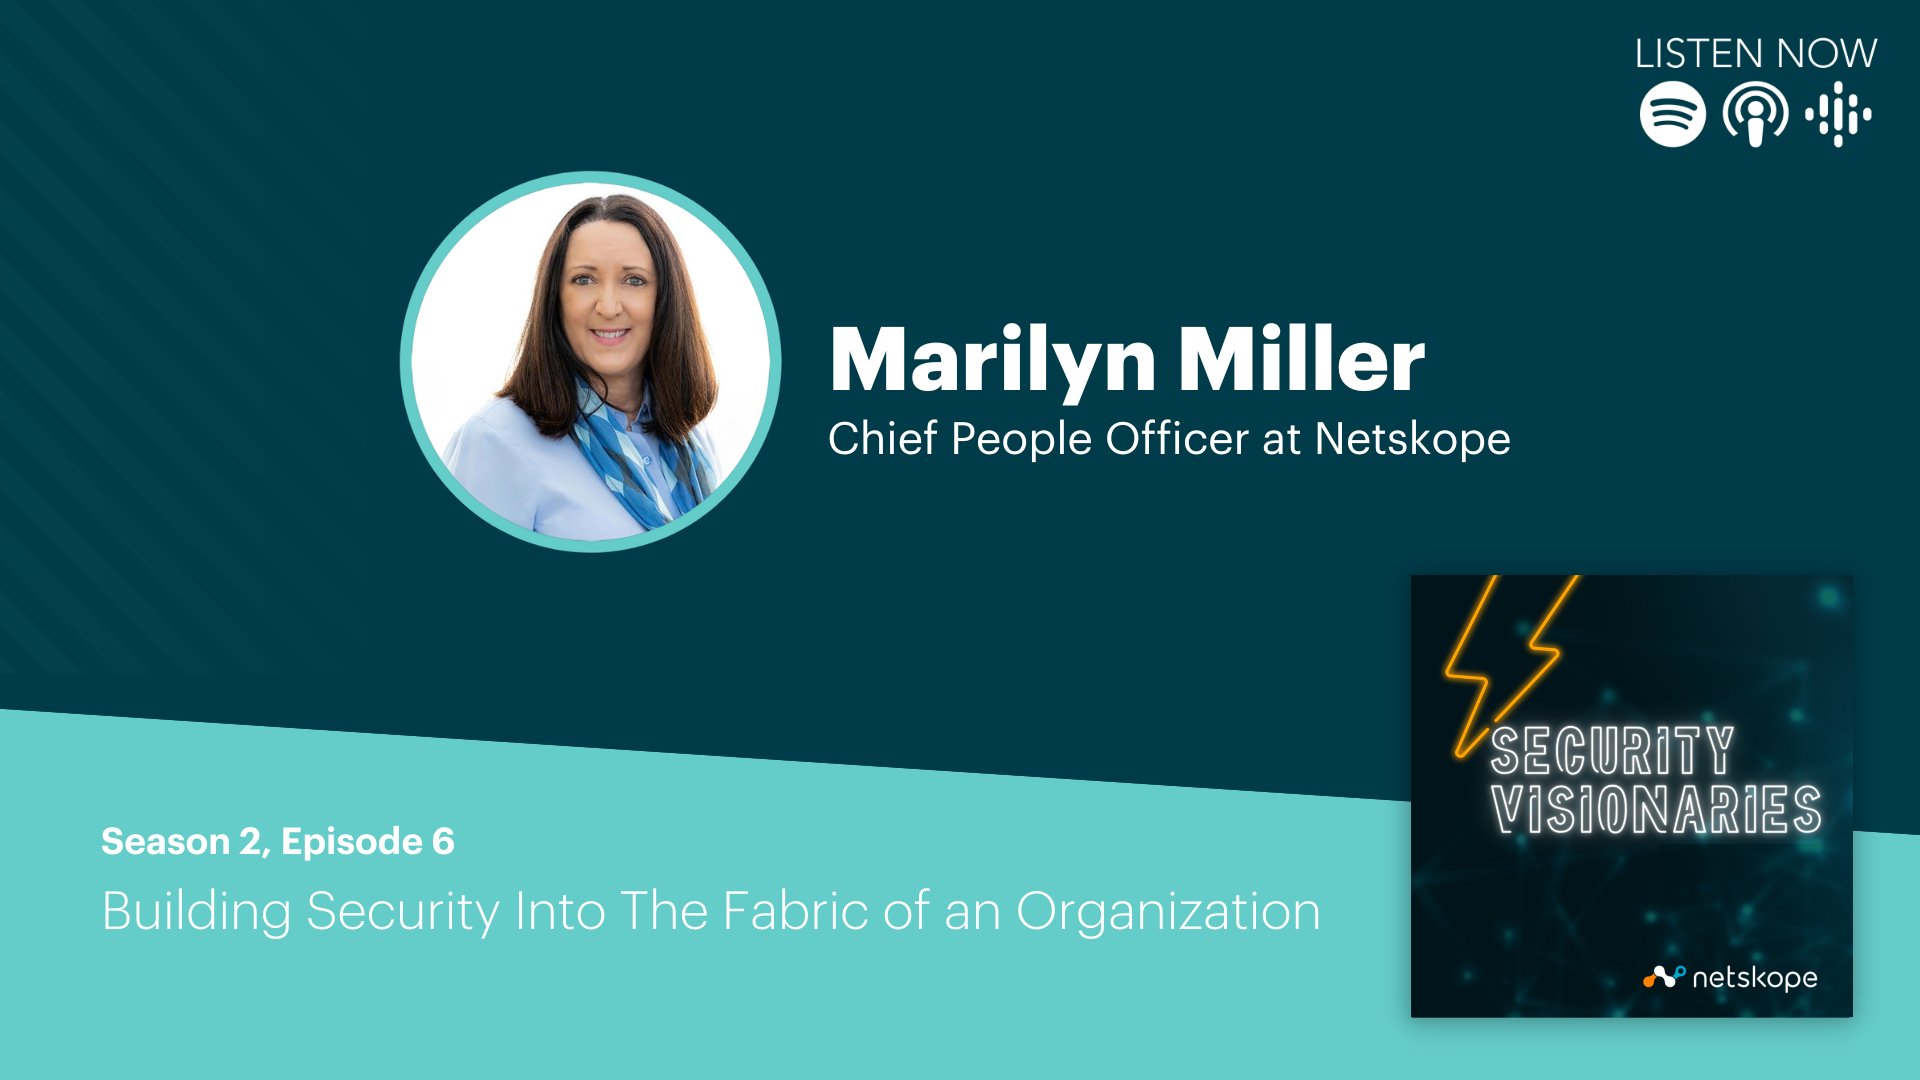 Building Security into the Fabric of an Organization